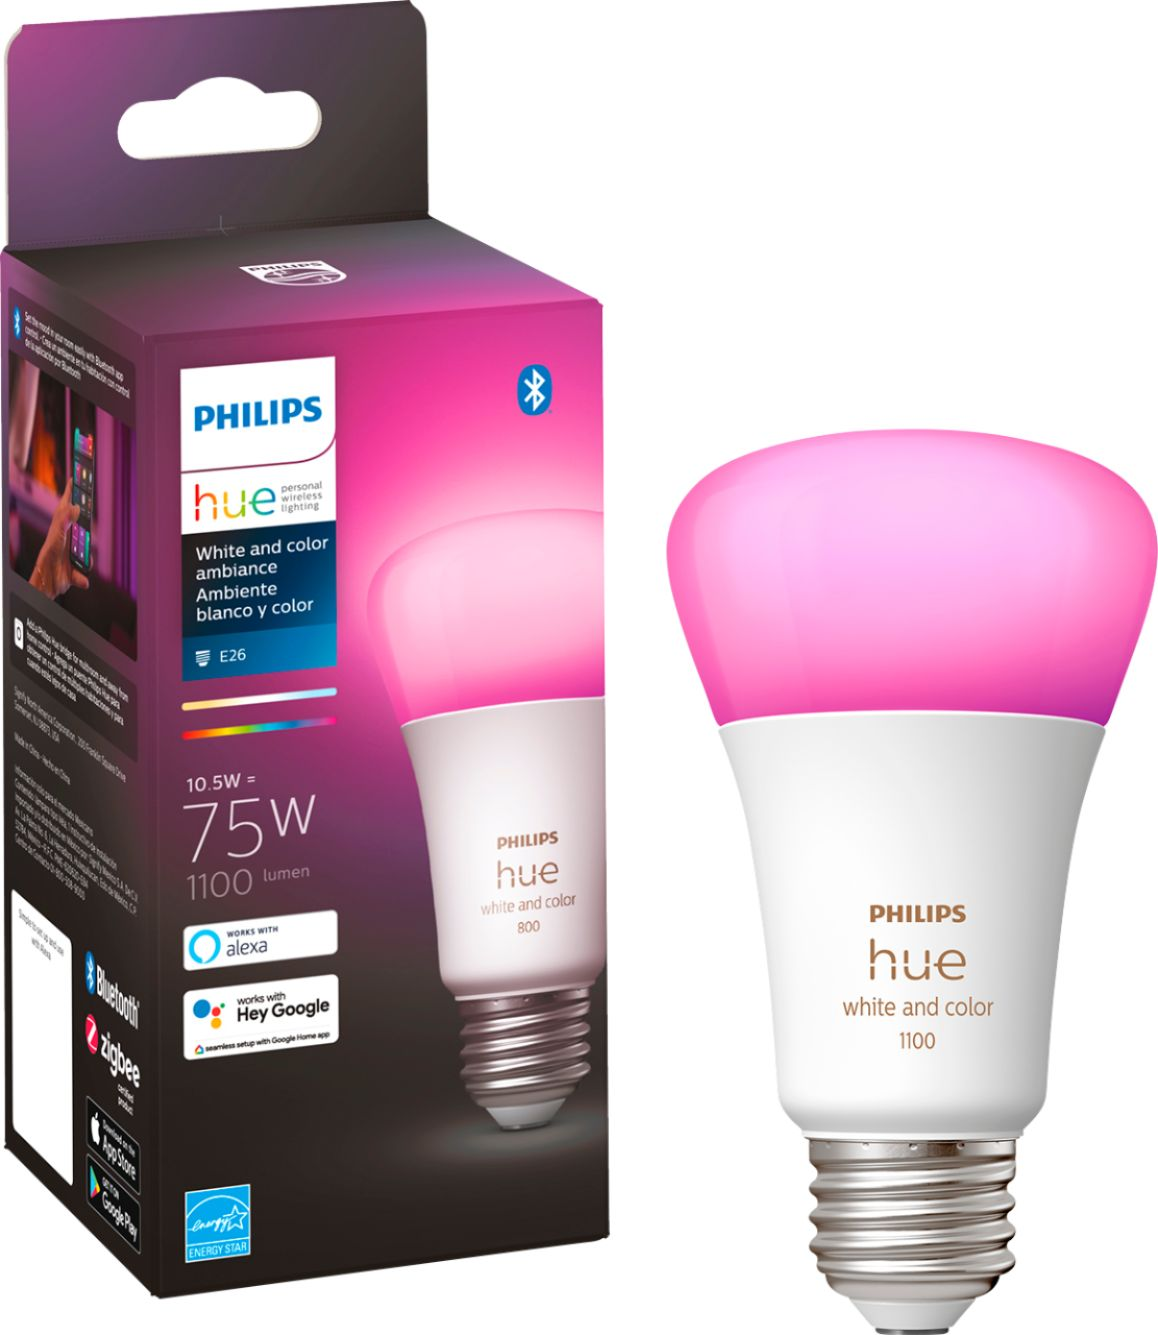 Philips Hue White and Color Ambiance A19 Bluetooth 75W Smart LED Bulb 563254 - Best Buy $34.99